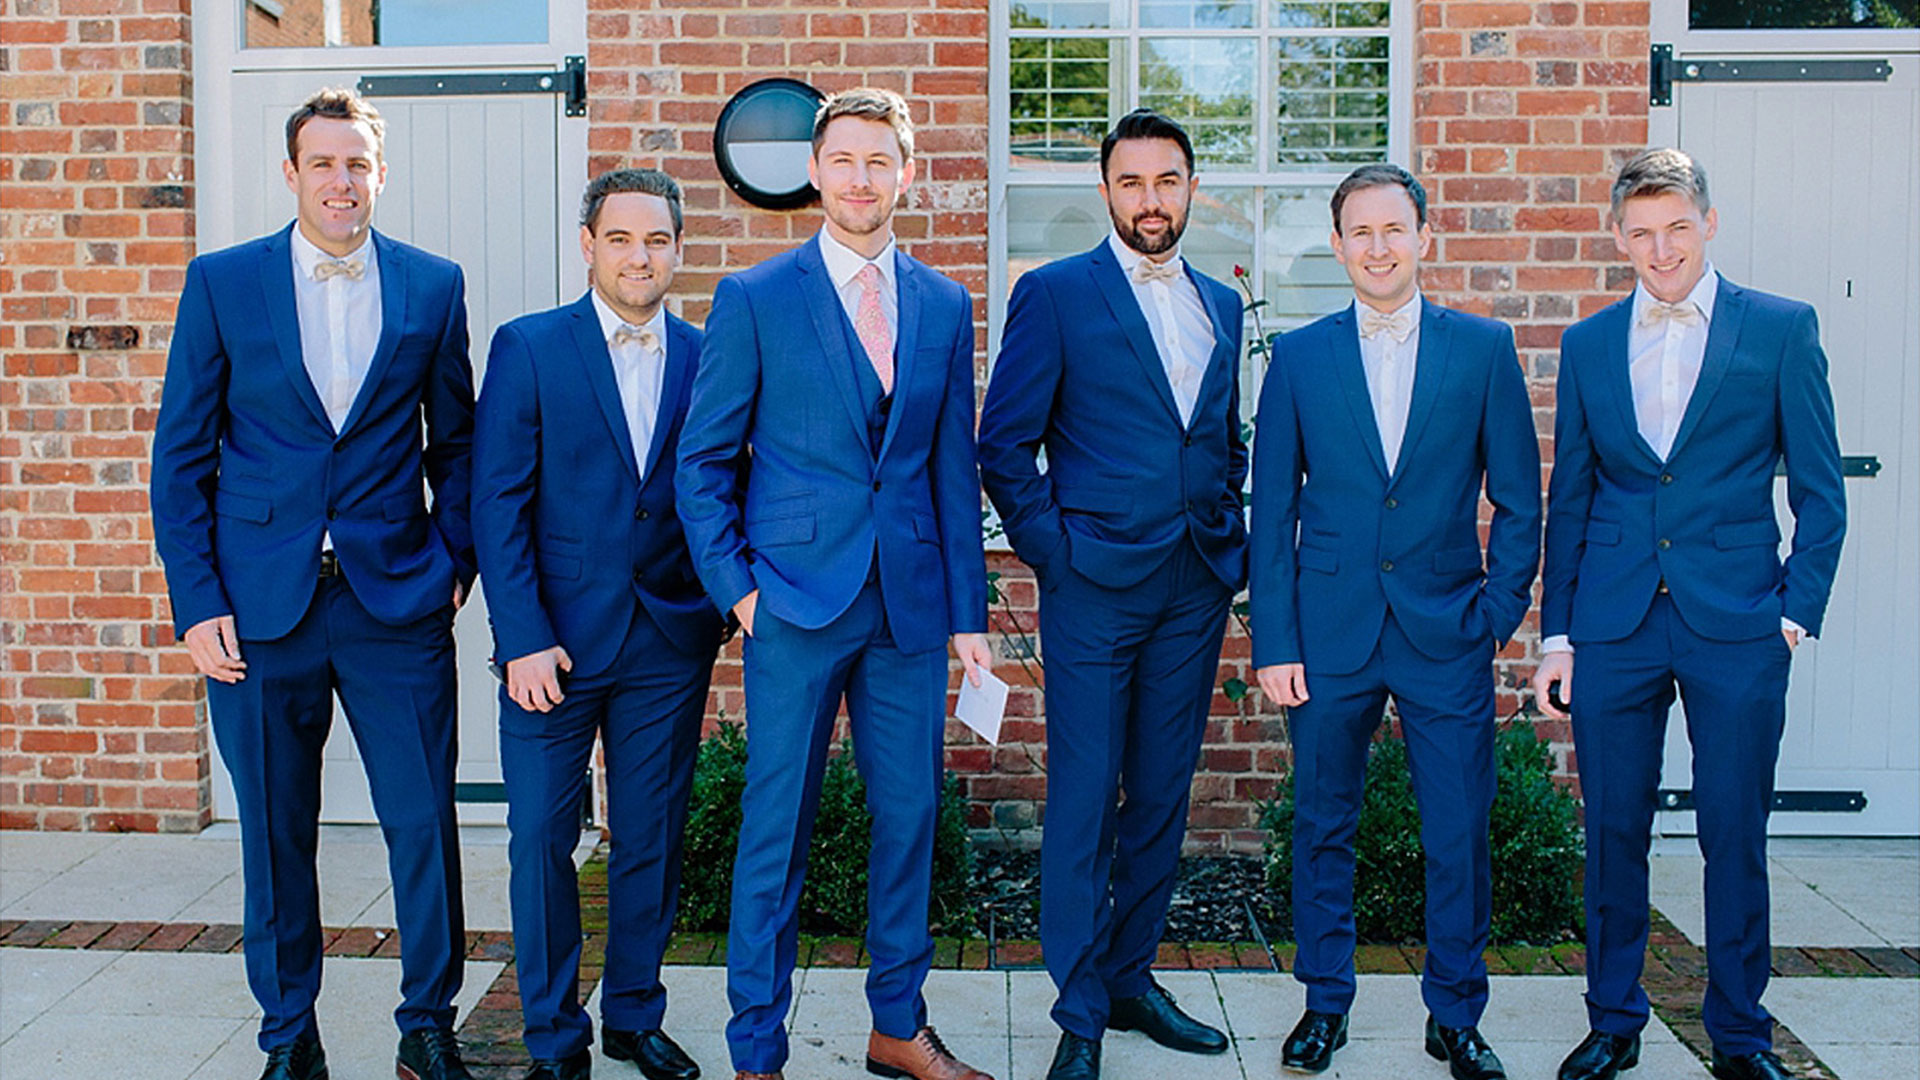 A groom and his groomsmen look stylish in blue suits ready for a barn wedding